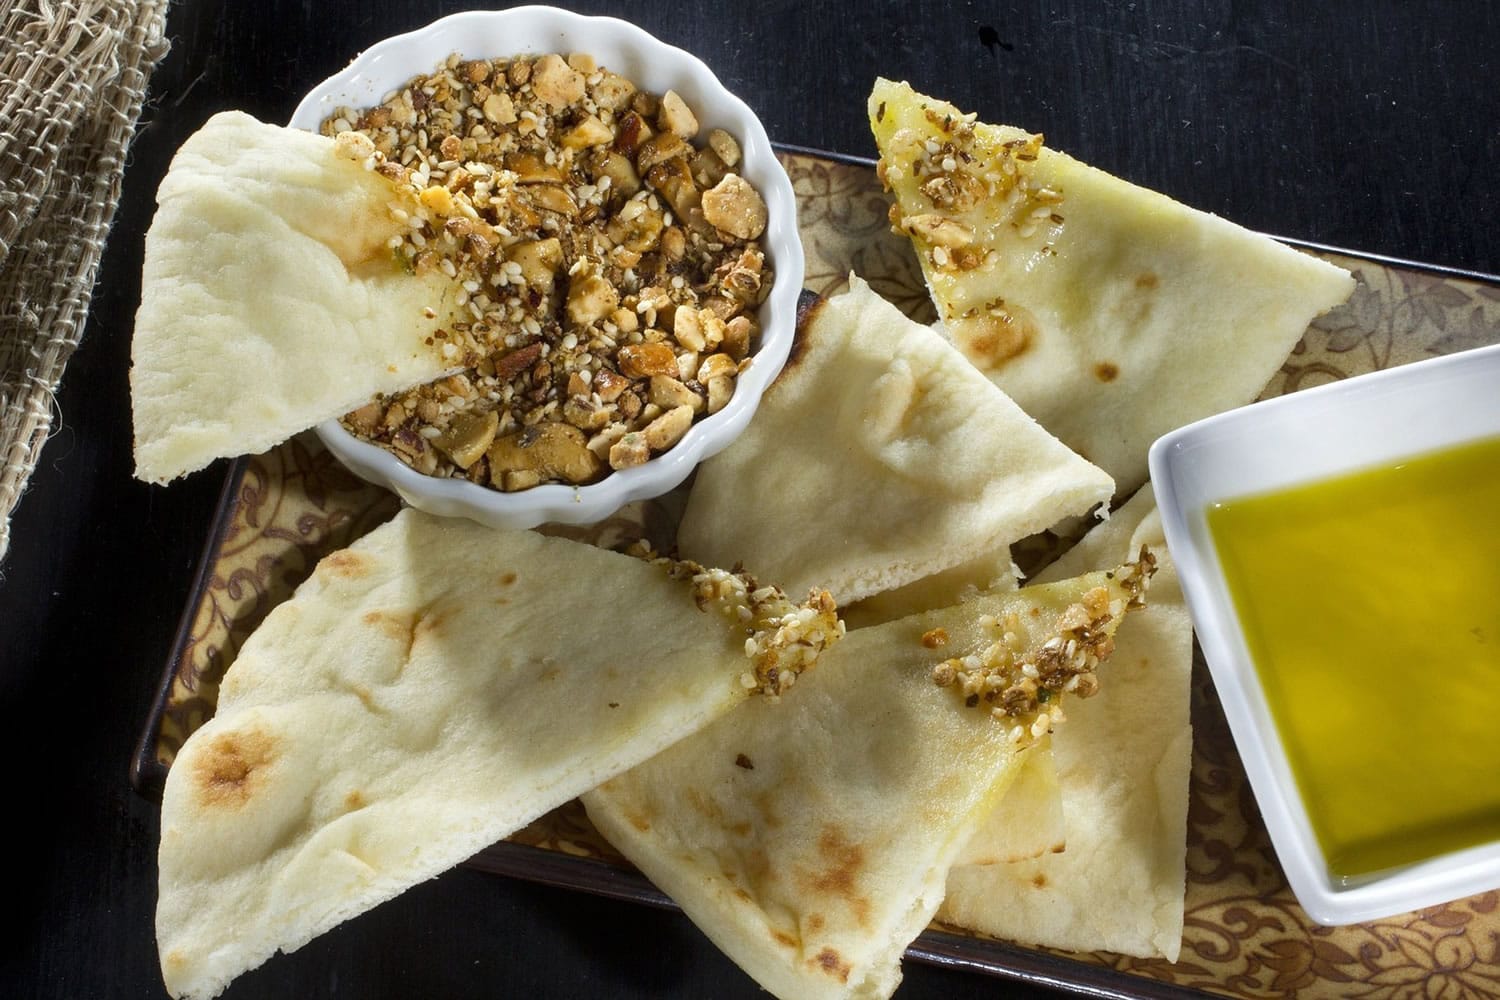 Spicy dukkah is a healthy dip for pita and veggies.